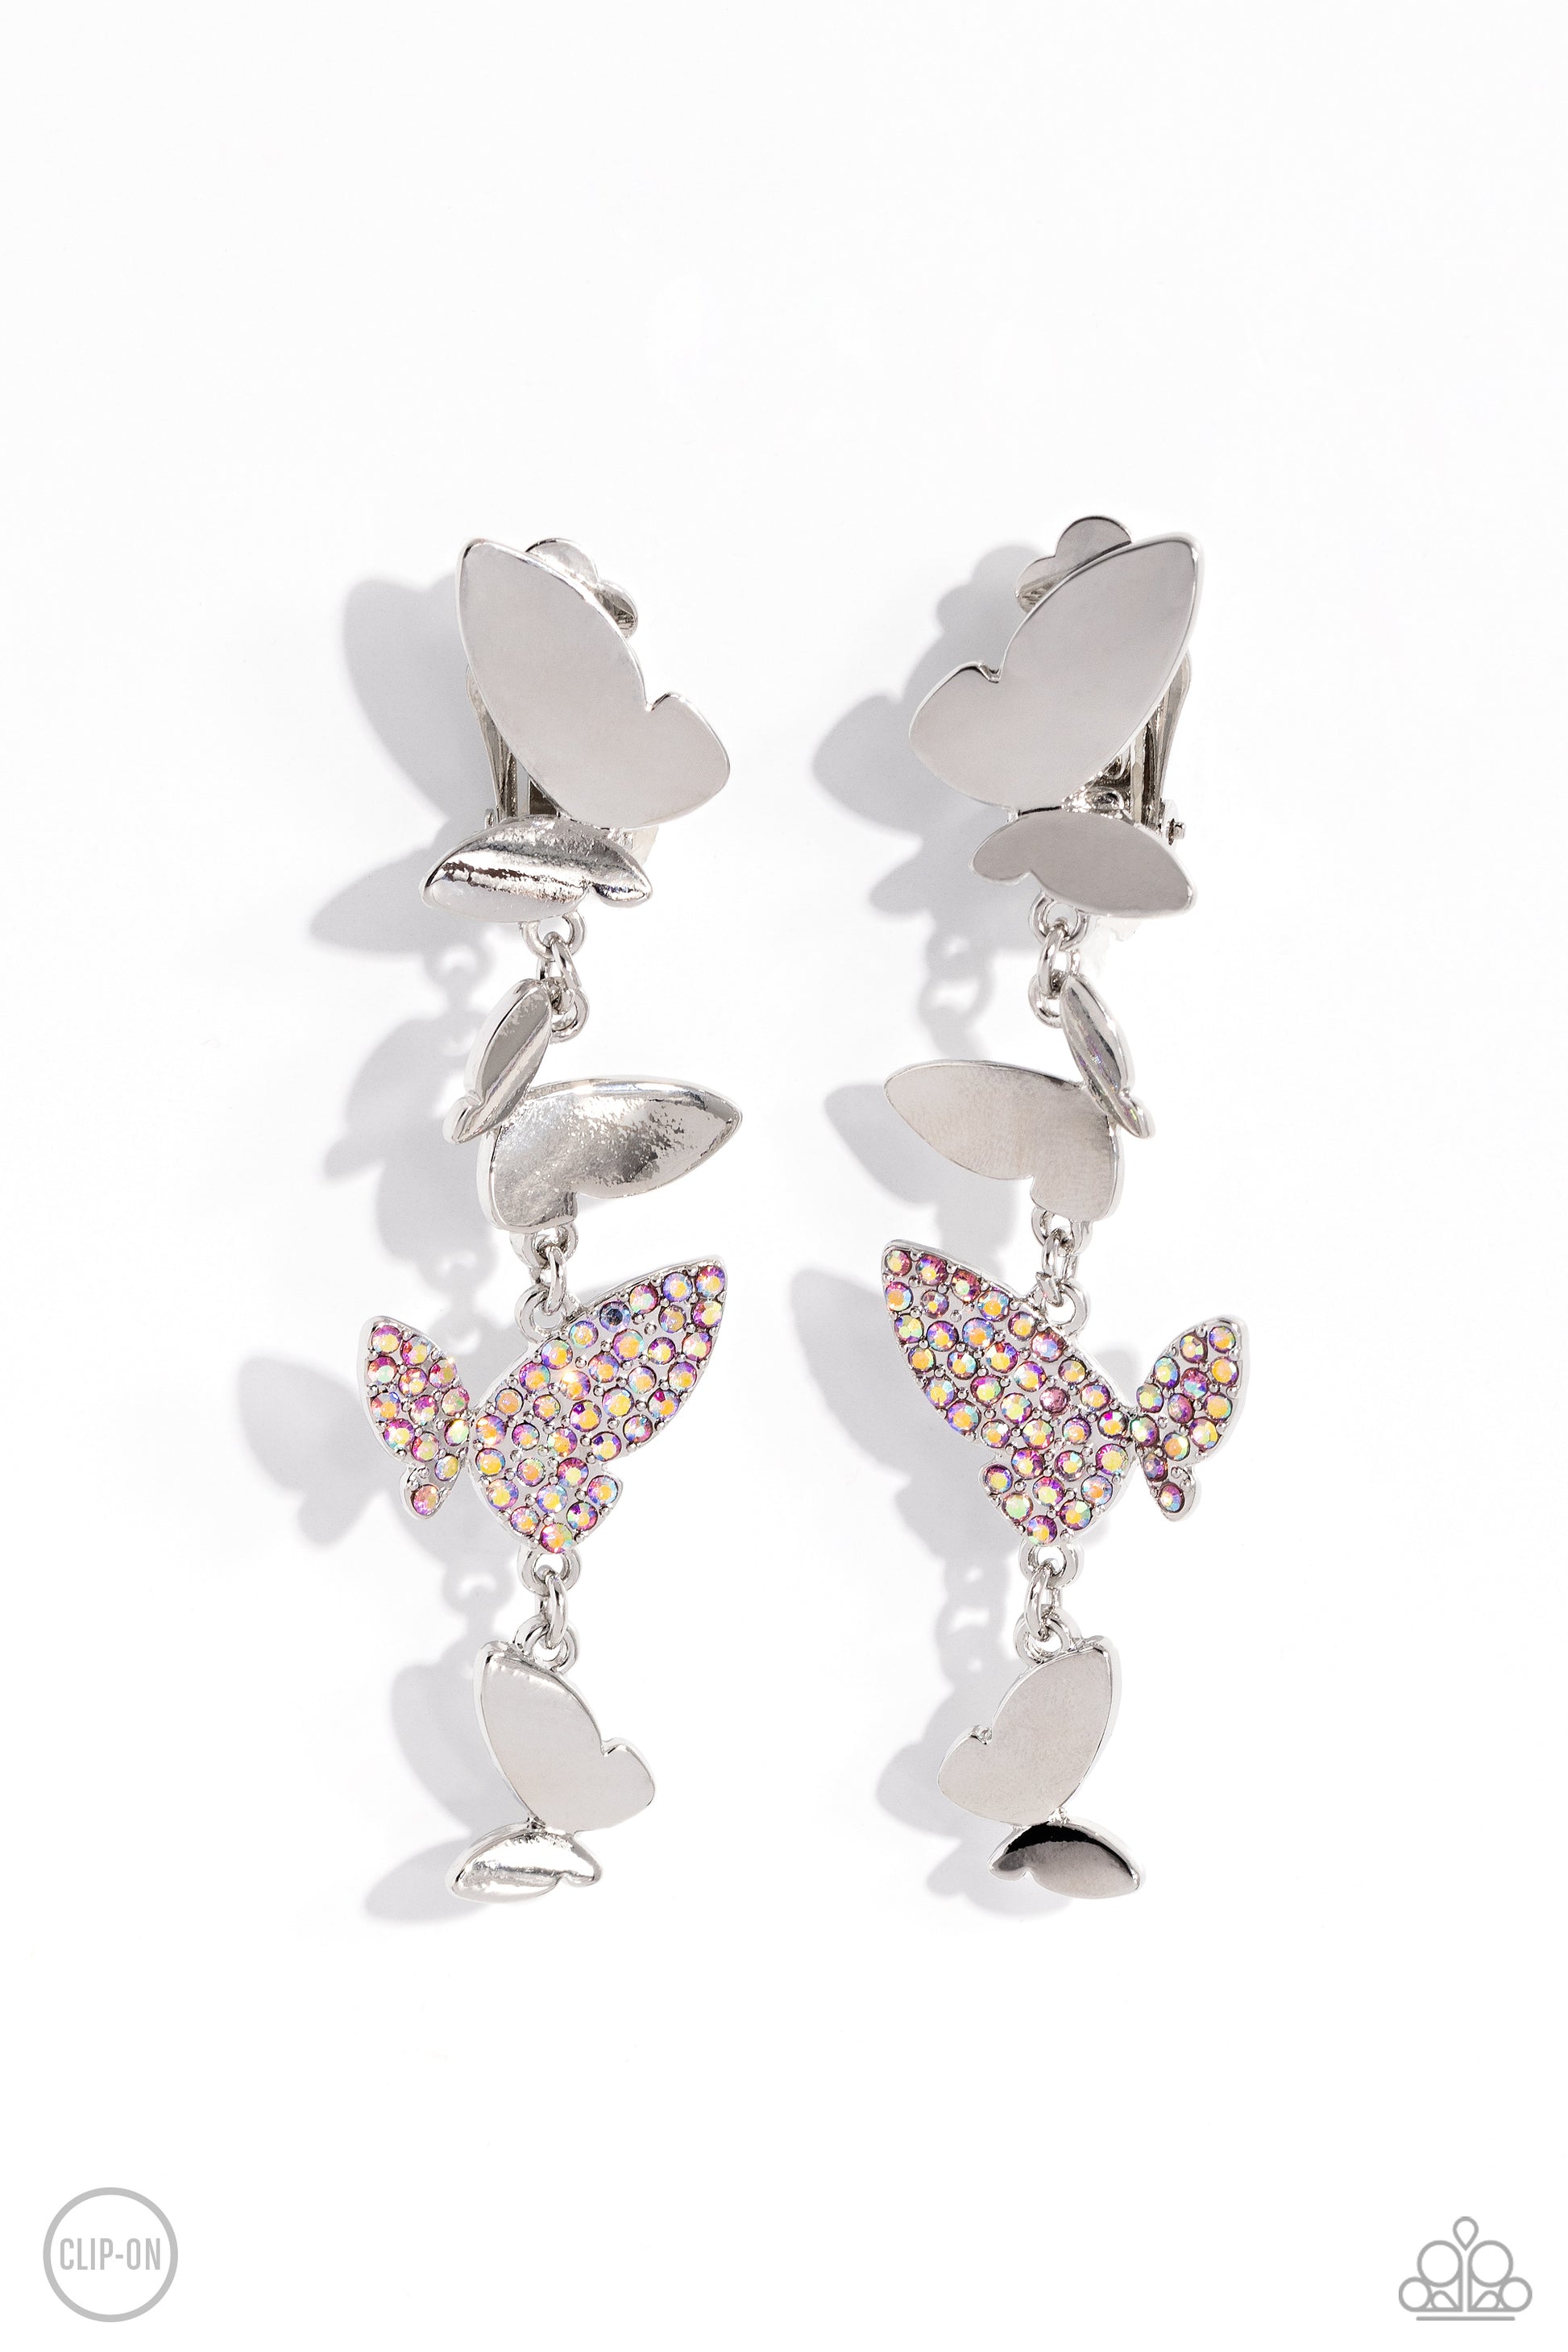 Flying Flashy Pink Butterfly Clip-On Earring - Paparazzi Accessories  Three butterflies with high-sheen silver wings and one pink iridescent-encrusted butterfly flutter down the ear, creating a free-spirited lure. Each butterfly swings in whimsical asymmetry, creating the look of butterflies flying in alternating directions. Earring attaches to a standard clip-on fitting. Due to its prismatic palette, color may vary.  Sold as one pair of clip-on earrings.  P5CO-PKXX-047XX